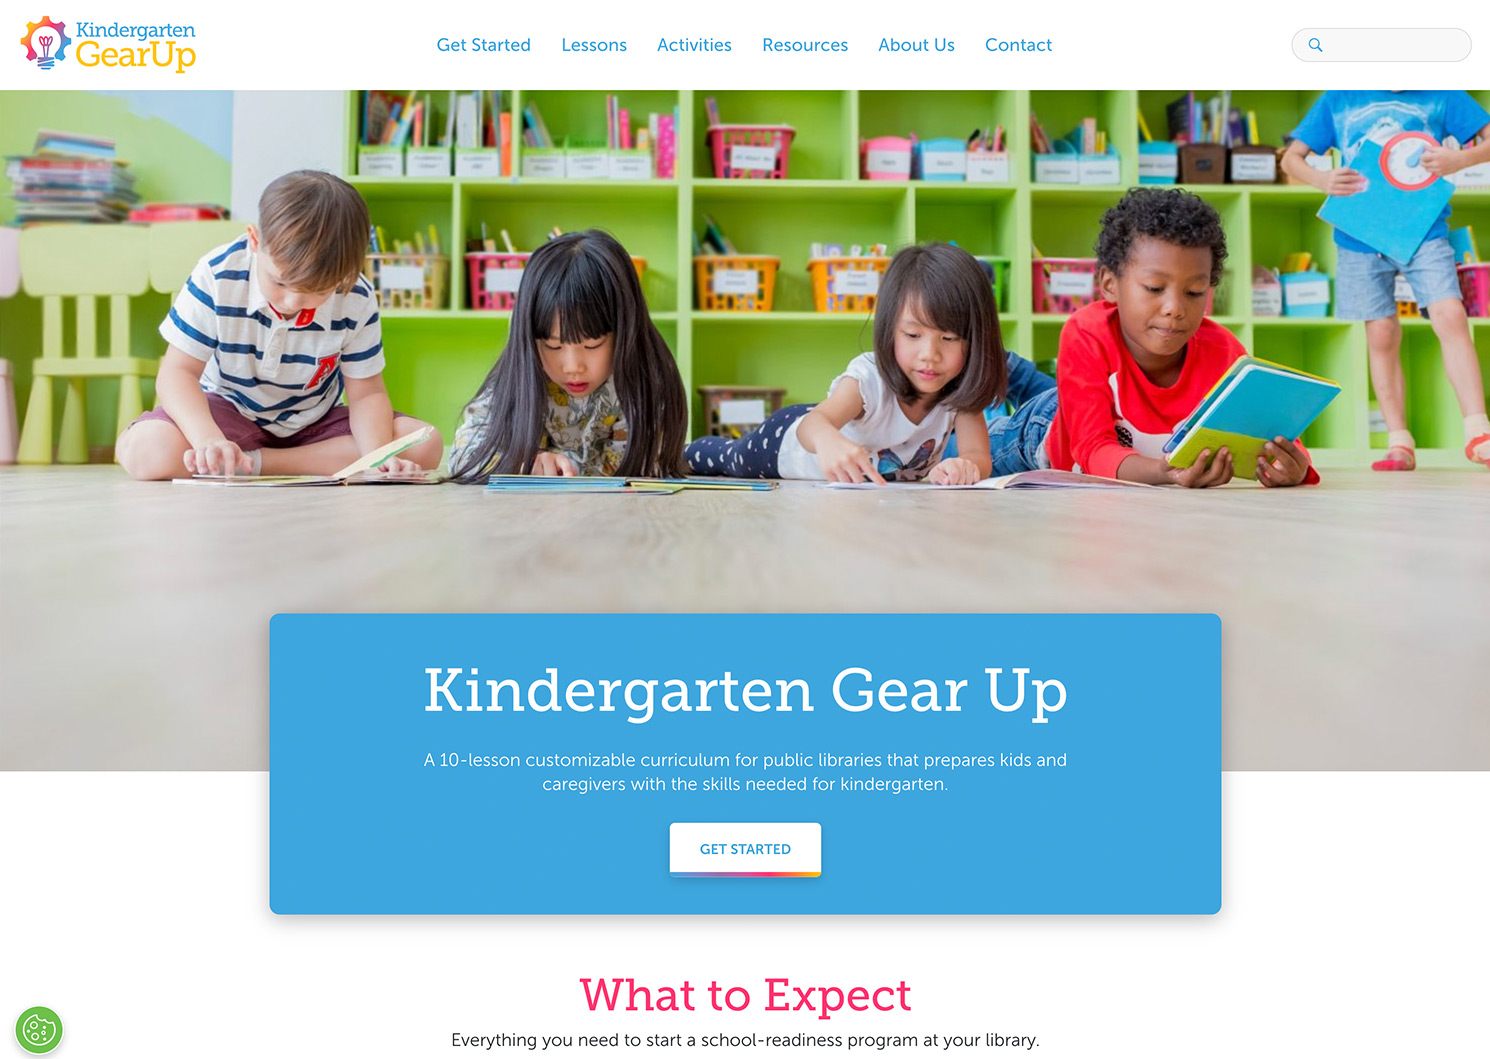 The homepage of the Kindergarten Gear Up website featuring a "get started" button